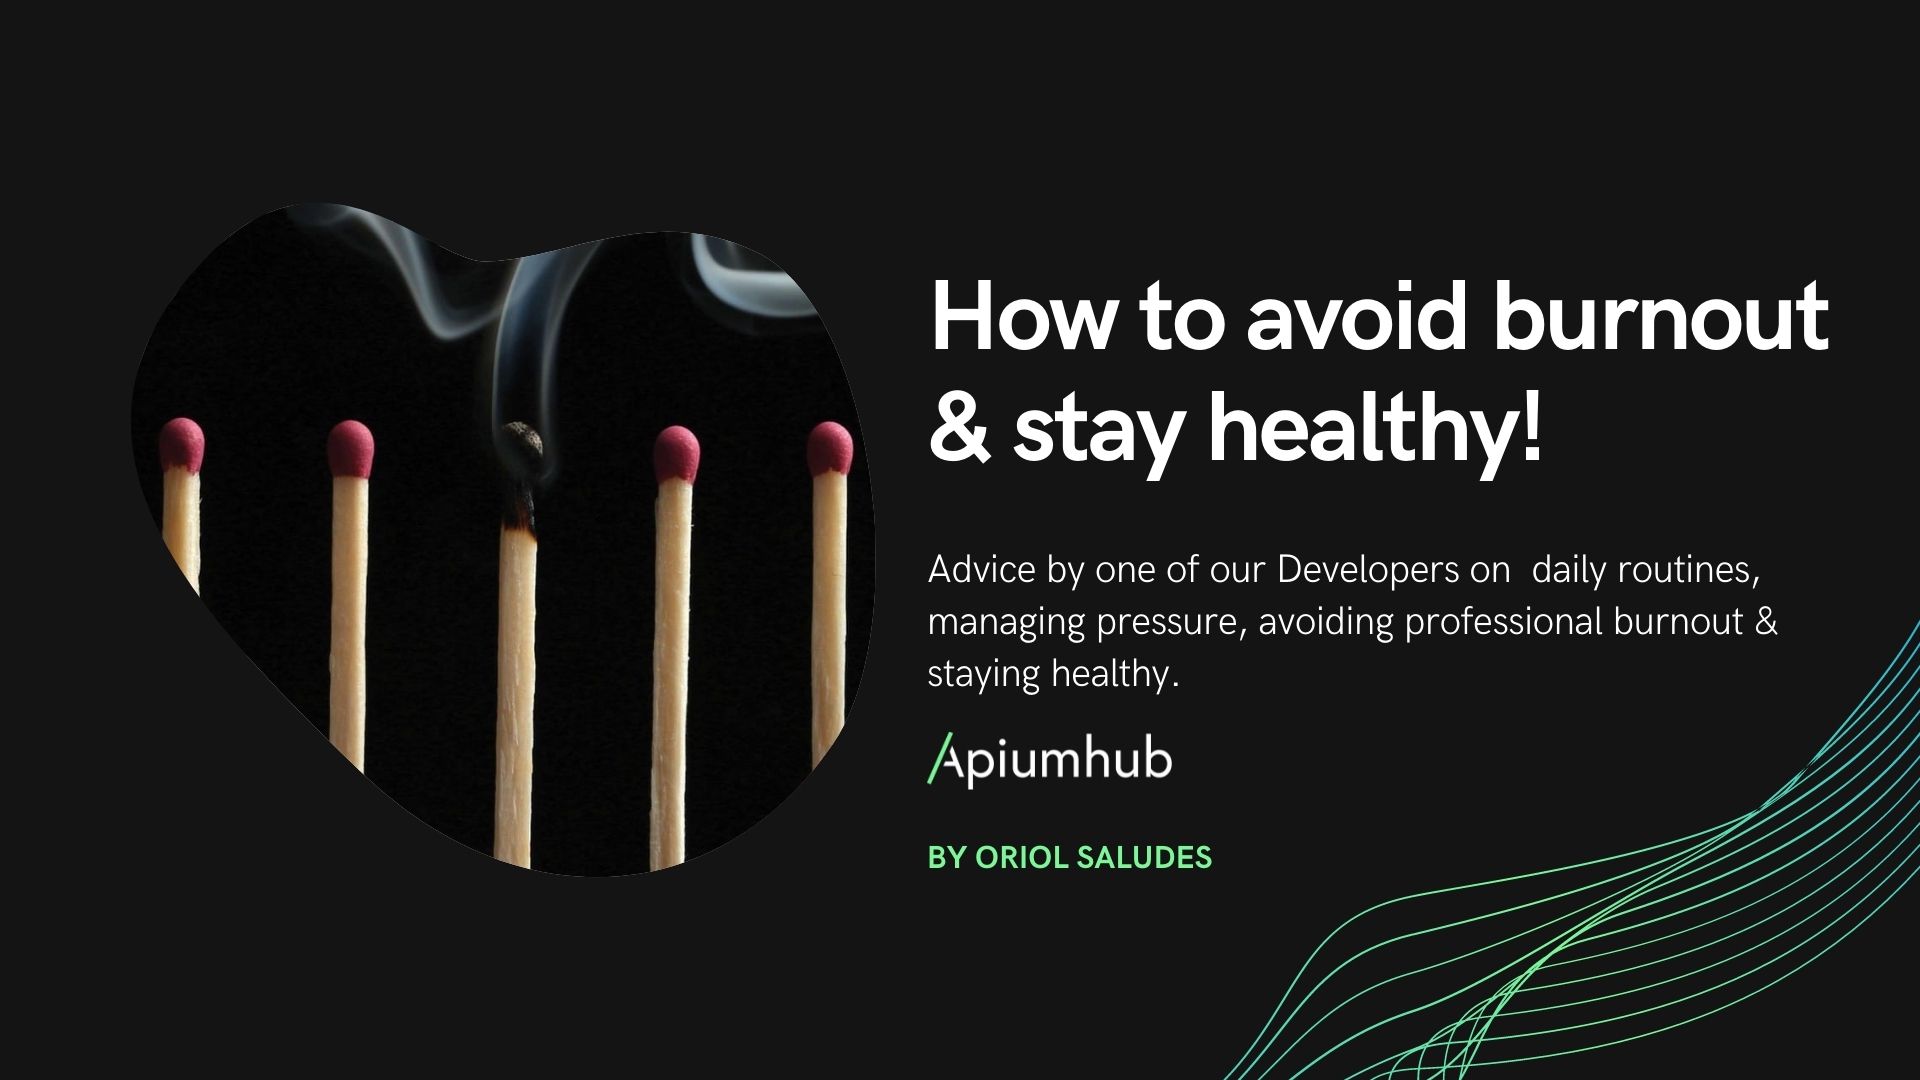 Developer's Advice: how to avoid burnout & stay healthy!